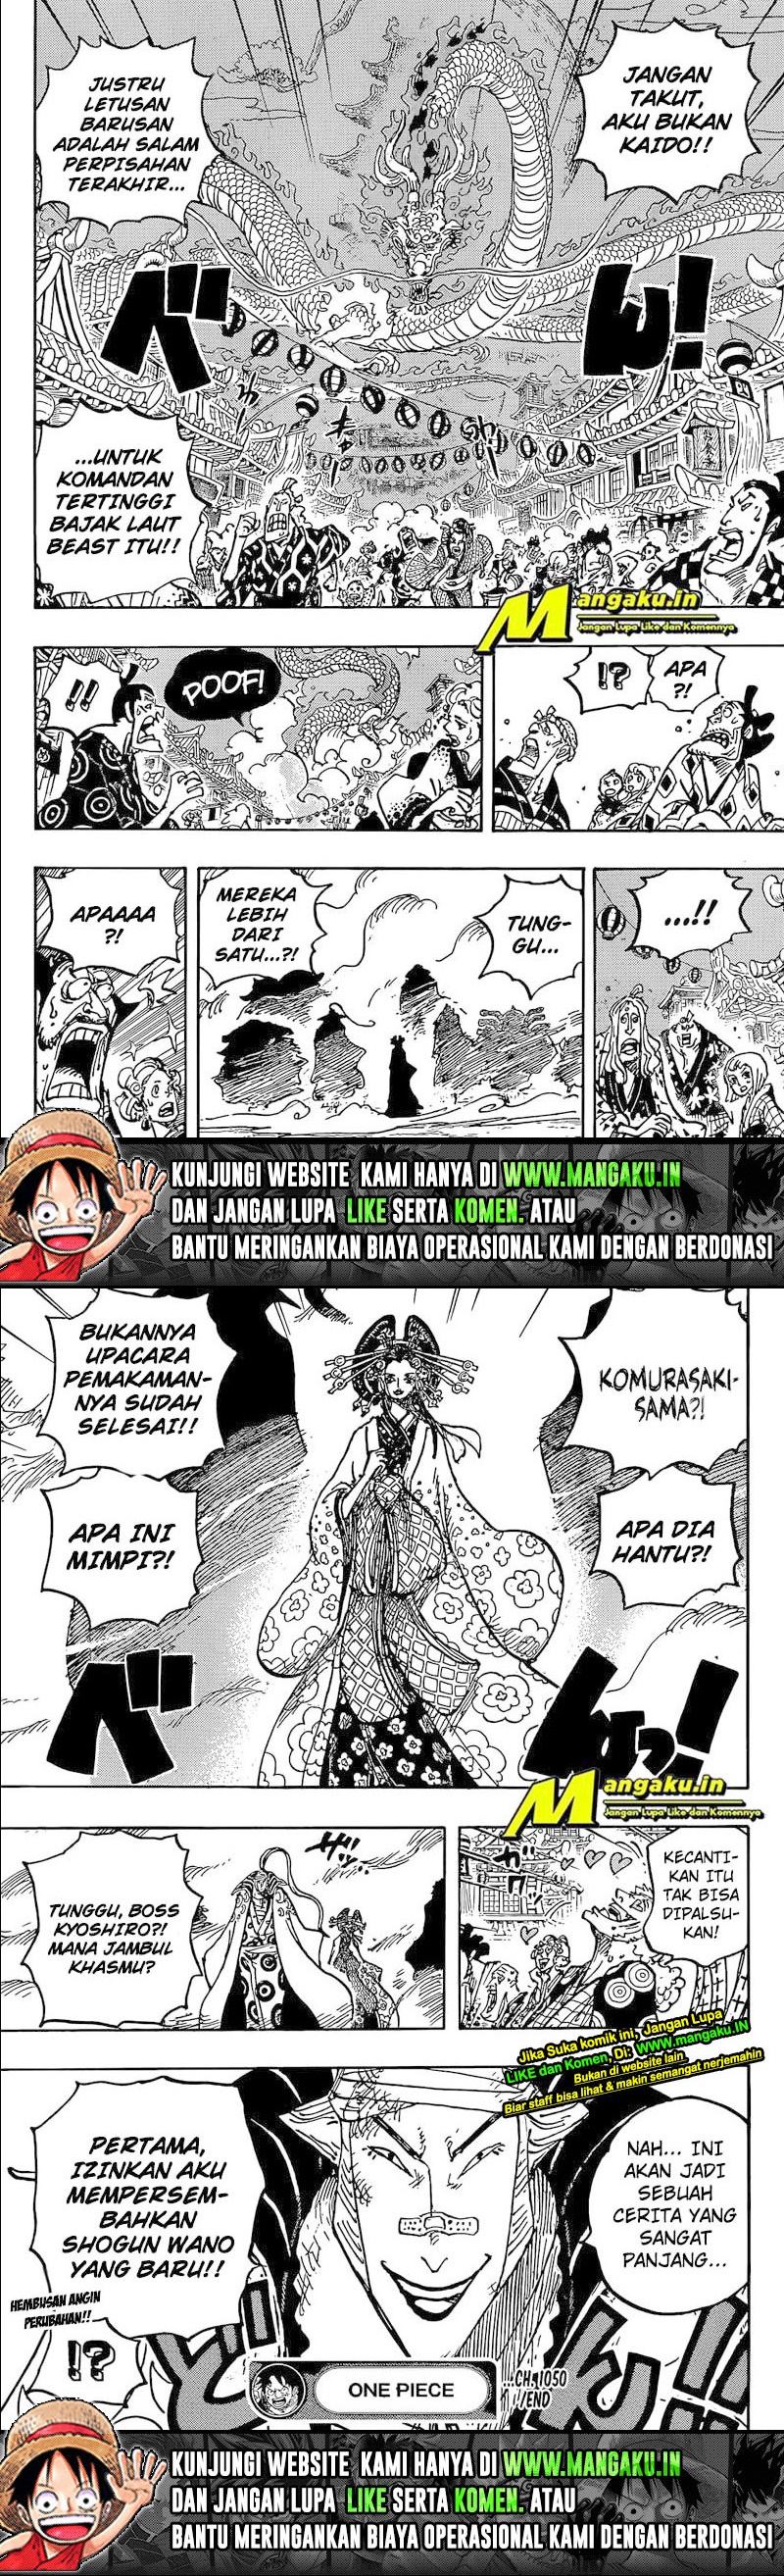 One Piece Chapter 1050 hq Bahasa Indonesia